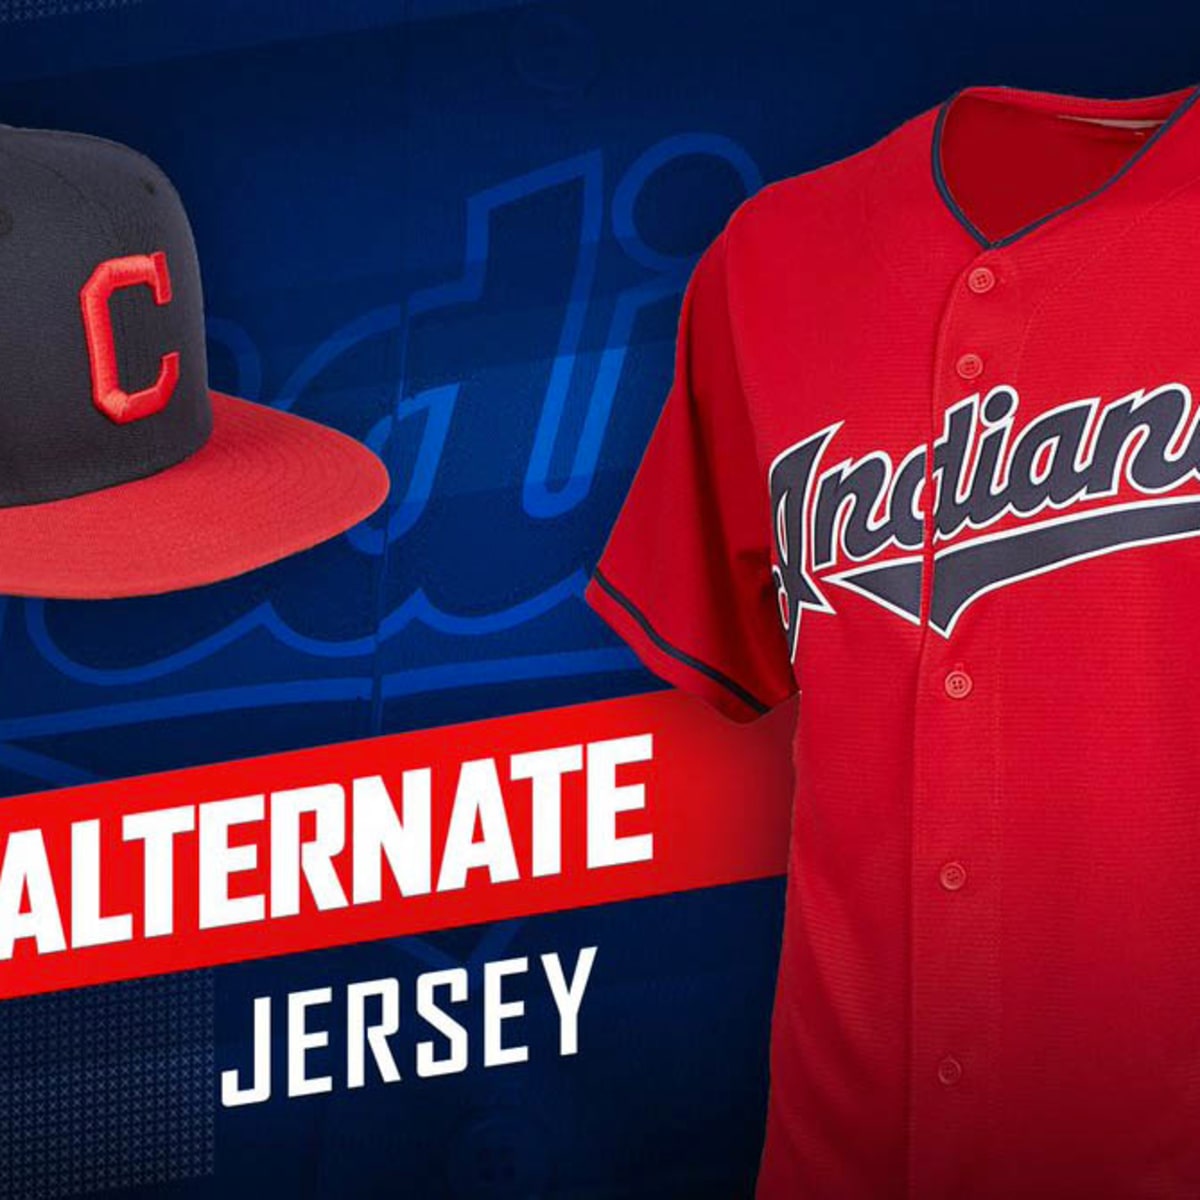 Indians uniforms: New home alternate jerseys, cap released - Sports  Illustrated